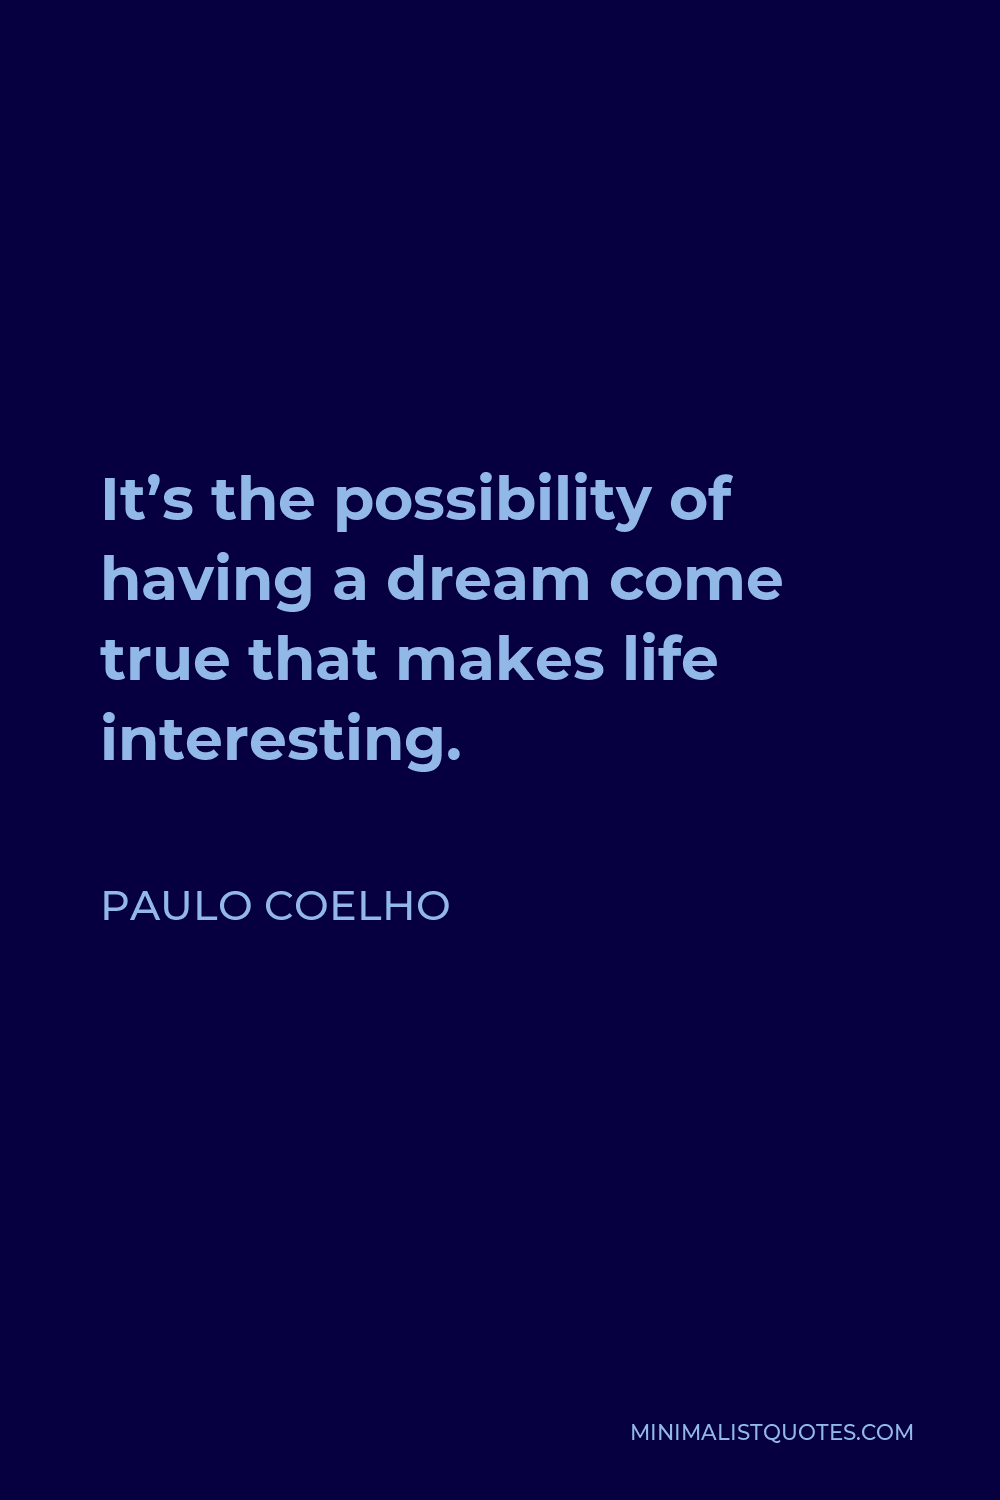 Paulo Coelho Quote - It’s the possibility of having a dream come true that makes life interesting.